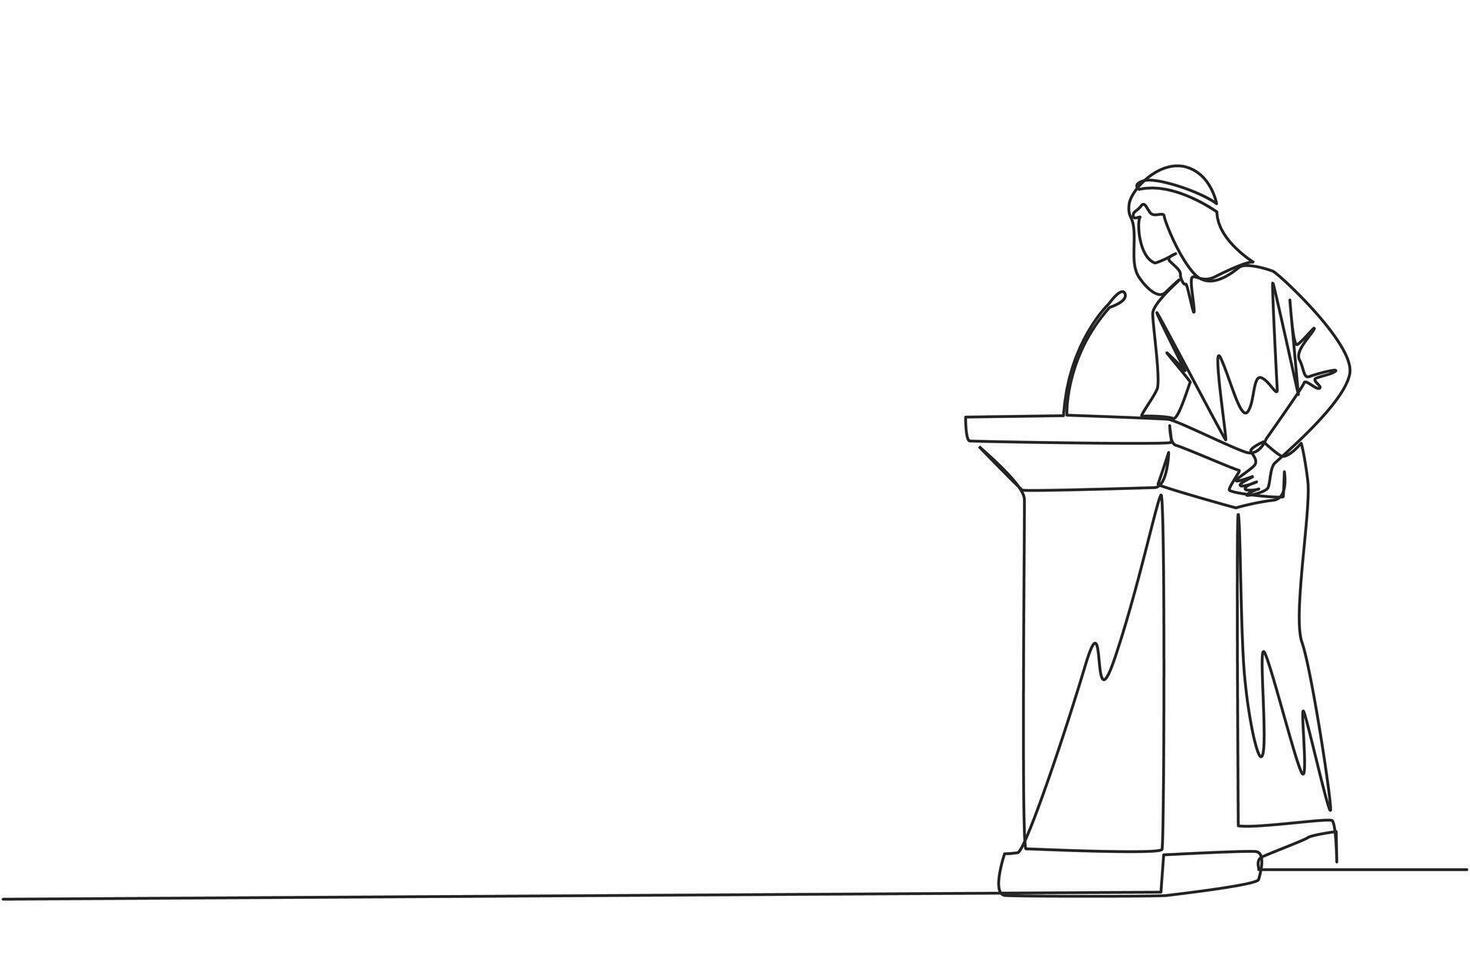 Single one line drawing Arabian businessman speech standing at podium. Give oration that world business can be more independent. Encourage through words. Continuous line design graphic illustration vector